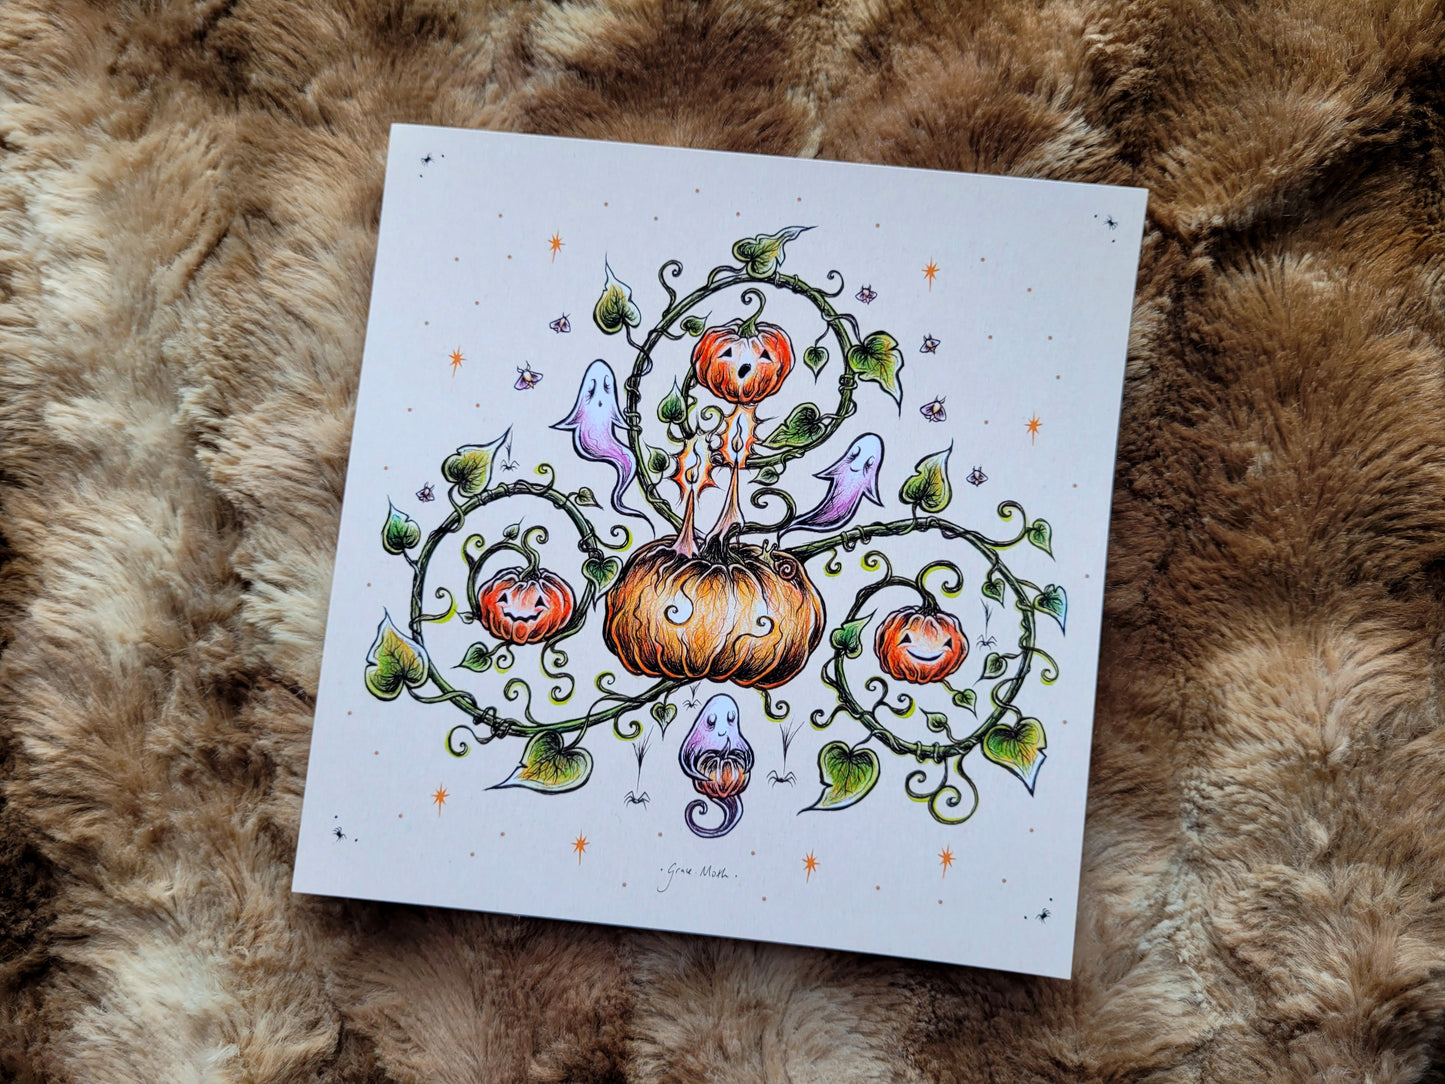 Pumpkin Patch with stars - Square art print by Grace Moth